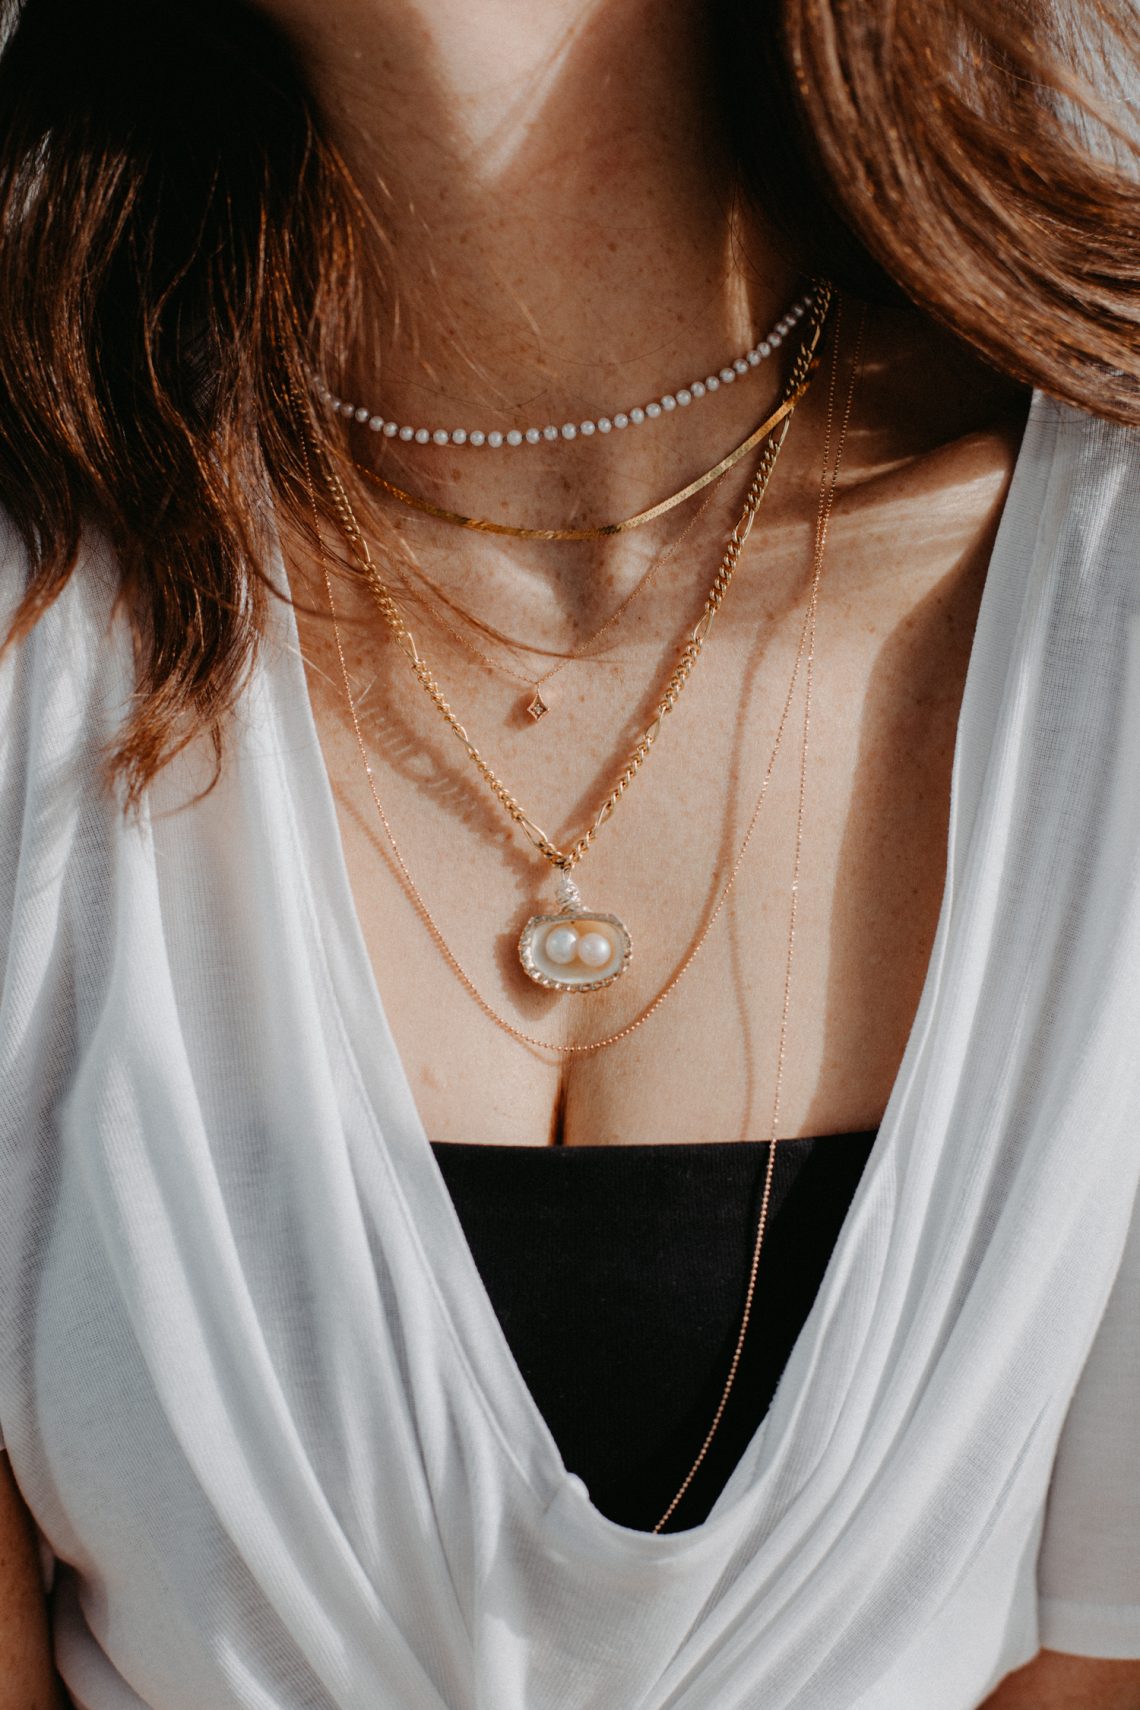 How To: Necklace Layering